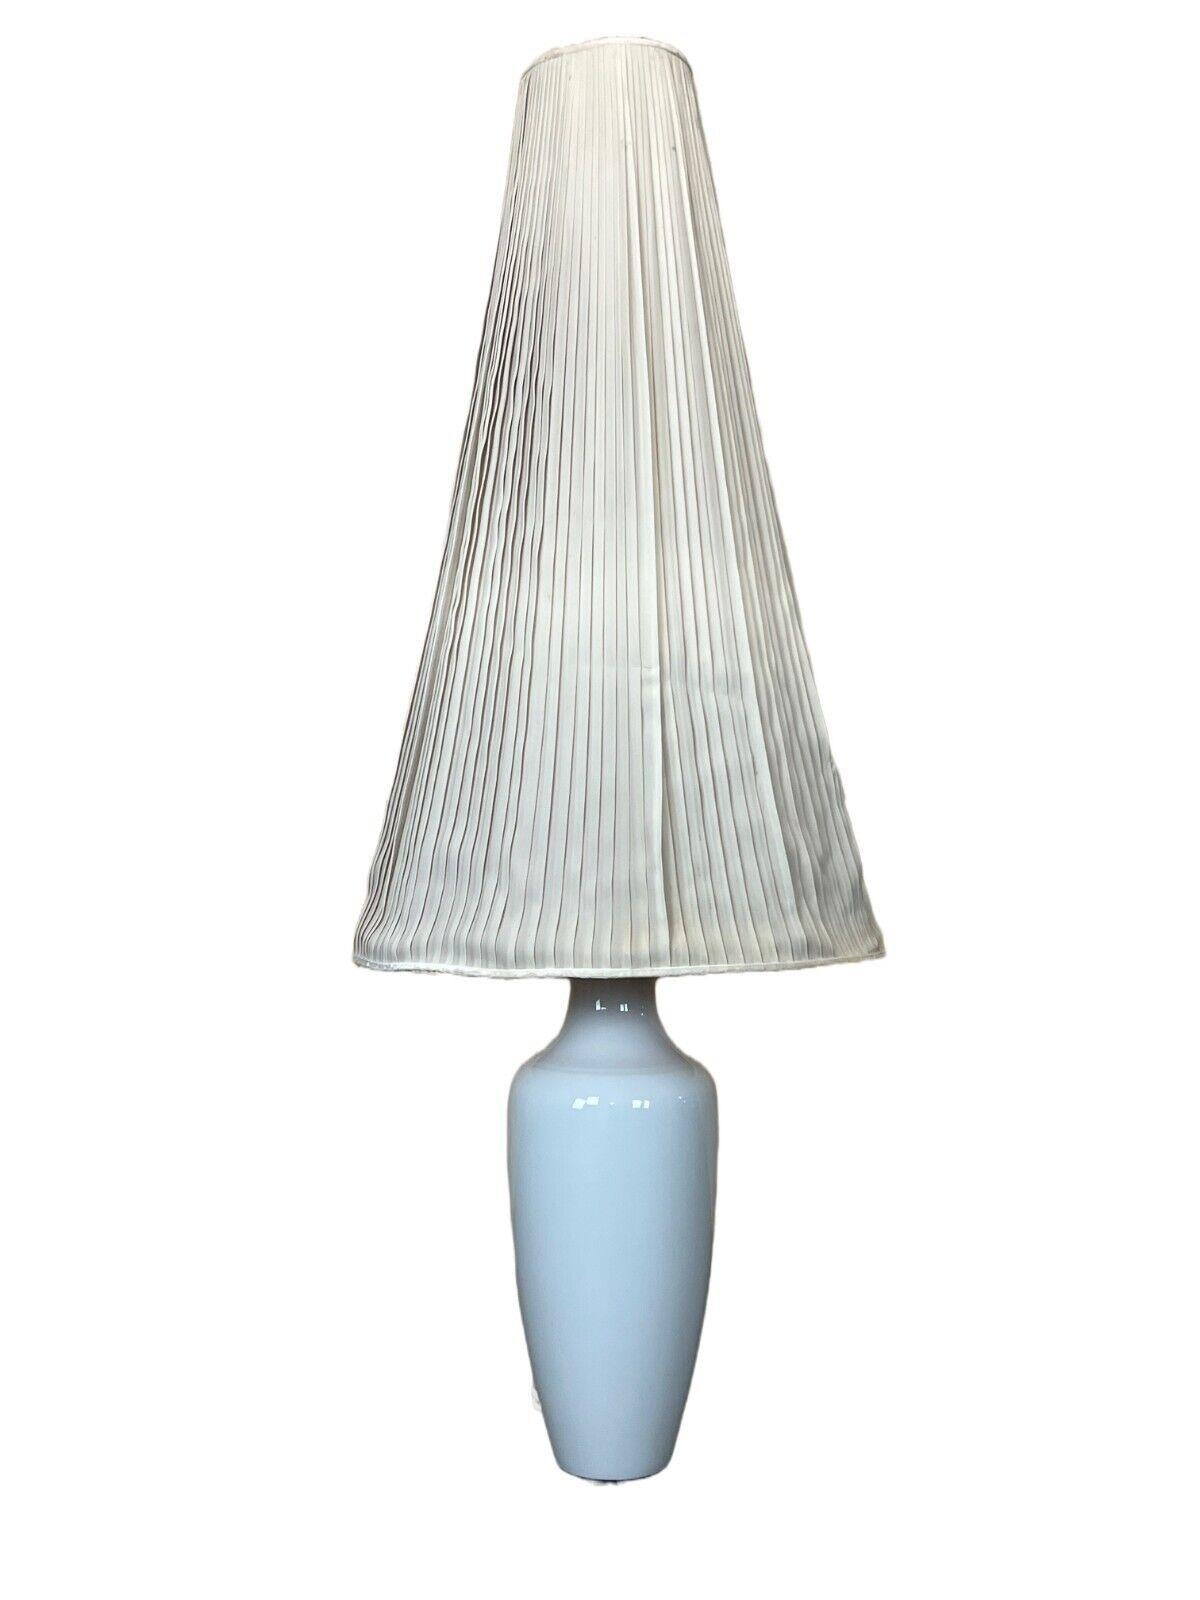 XL 60s 70s lamp light floor lamp porcelain KPM brass Space Age

Object: floor lamp

Manufacturer: KPM

Condition: good - vintage

Age: around 1960-1970

Dimensions:

Diameter = 60cm
Height = 167cm

Other notes:

2x E27 socket

The